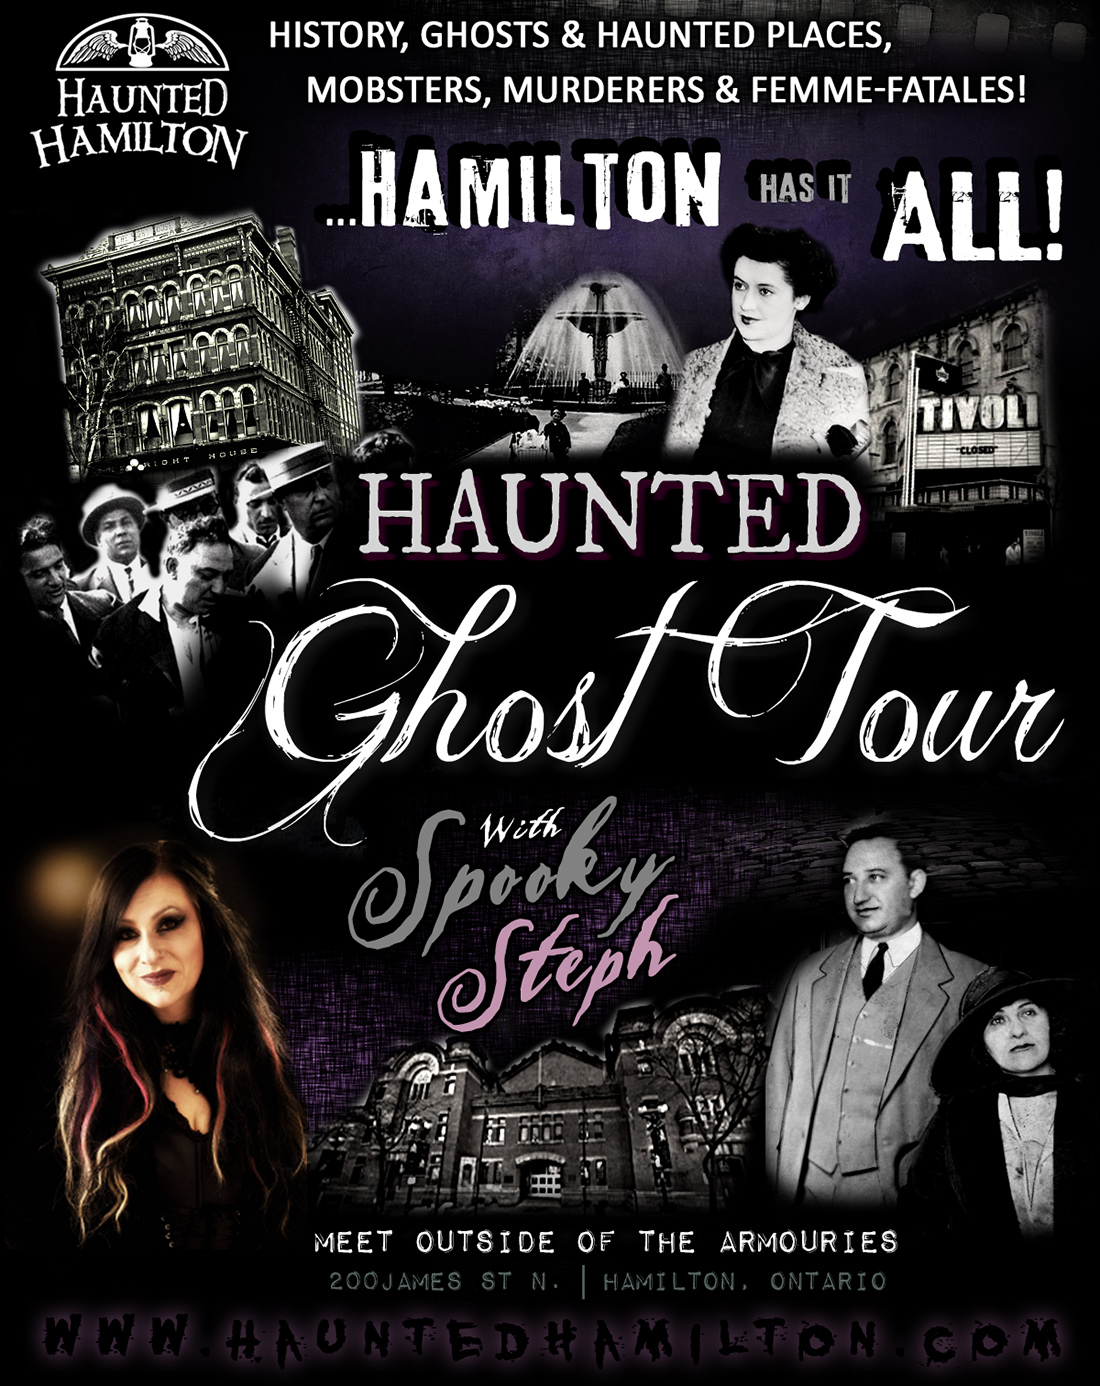 Haunted Hamilton presents a HAUNTED GHOST TOUR of Downtown Hamilton with your host, "Spooky Steph", Founder/Owner Since 1999! History, Ghosts and Haunted Places, Mobsters, Murderers and Femme Fatales! Rocco Perri, Evelyn Dick and Jack, The Royal Connaught Hotel, Whitehern, Gremlins in the Belltower and Jack the Ripper in Hamilton! All this and more, all through the eyes of Hamilton's one and only Spooky Queen! // Hamilton, Ontario, Canada